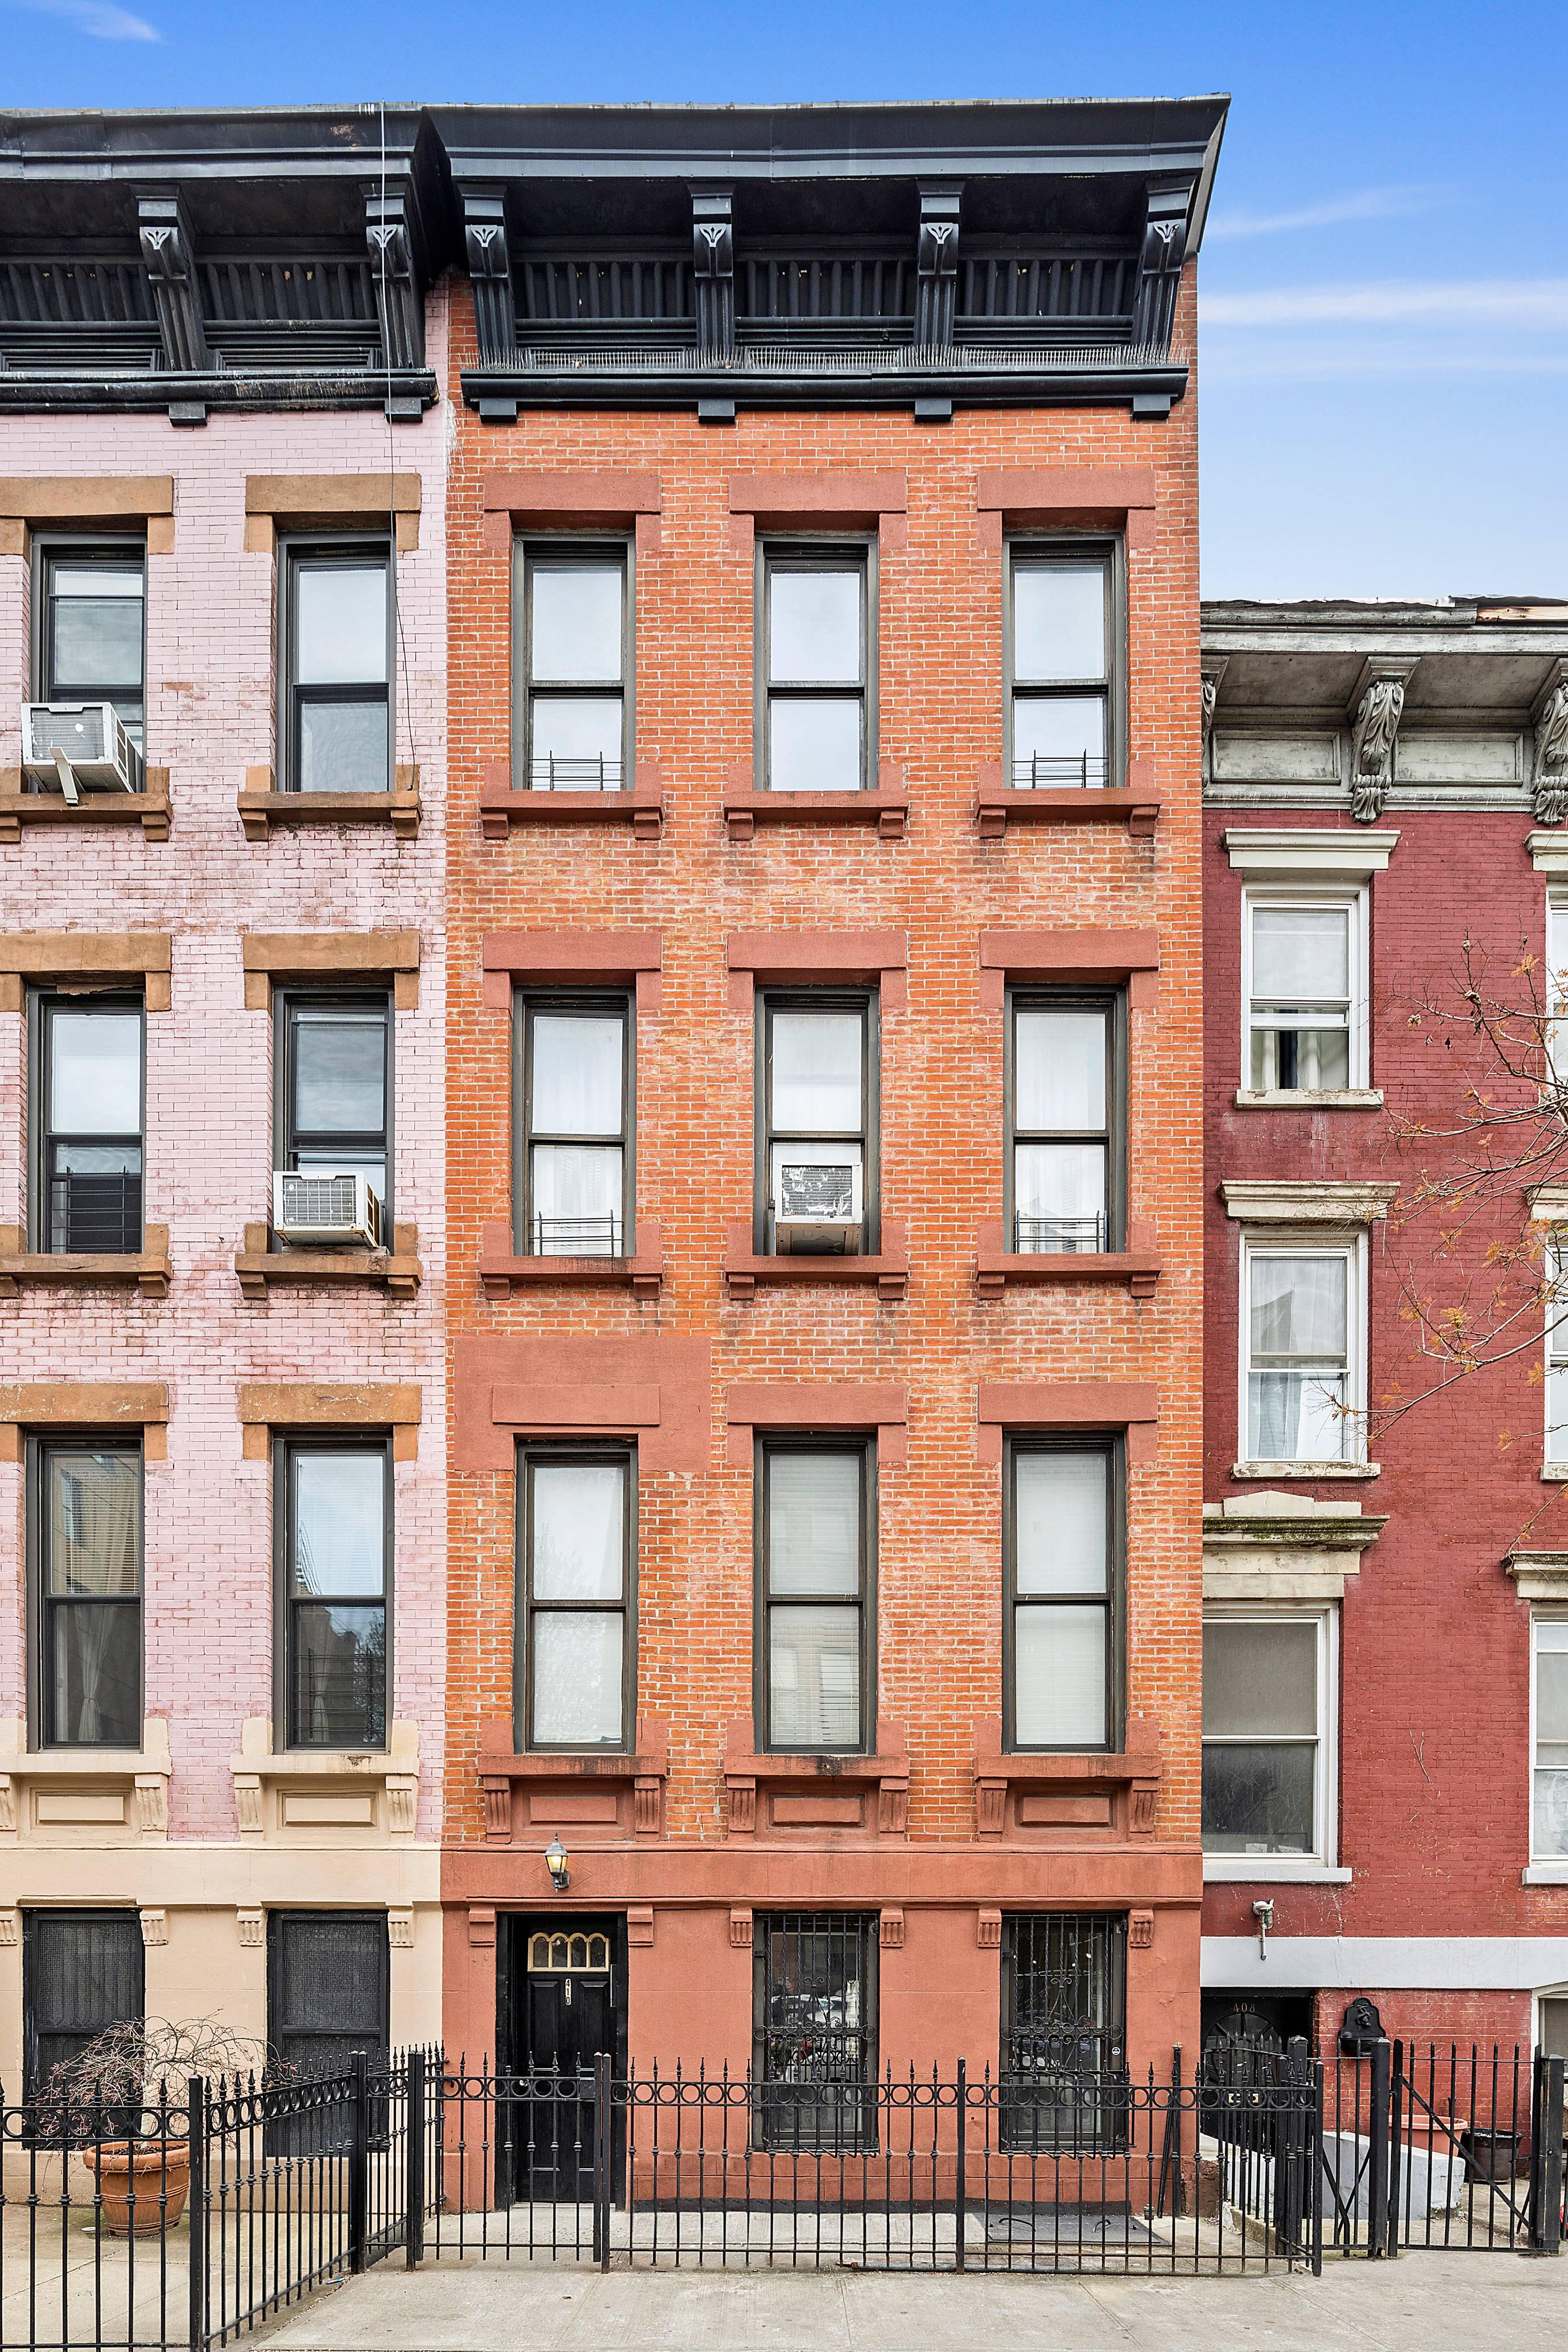 Calling all investors 410 East 117th Street, in the historic district in East Harlem, has hit the market.